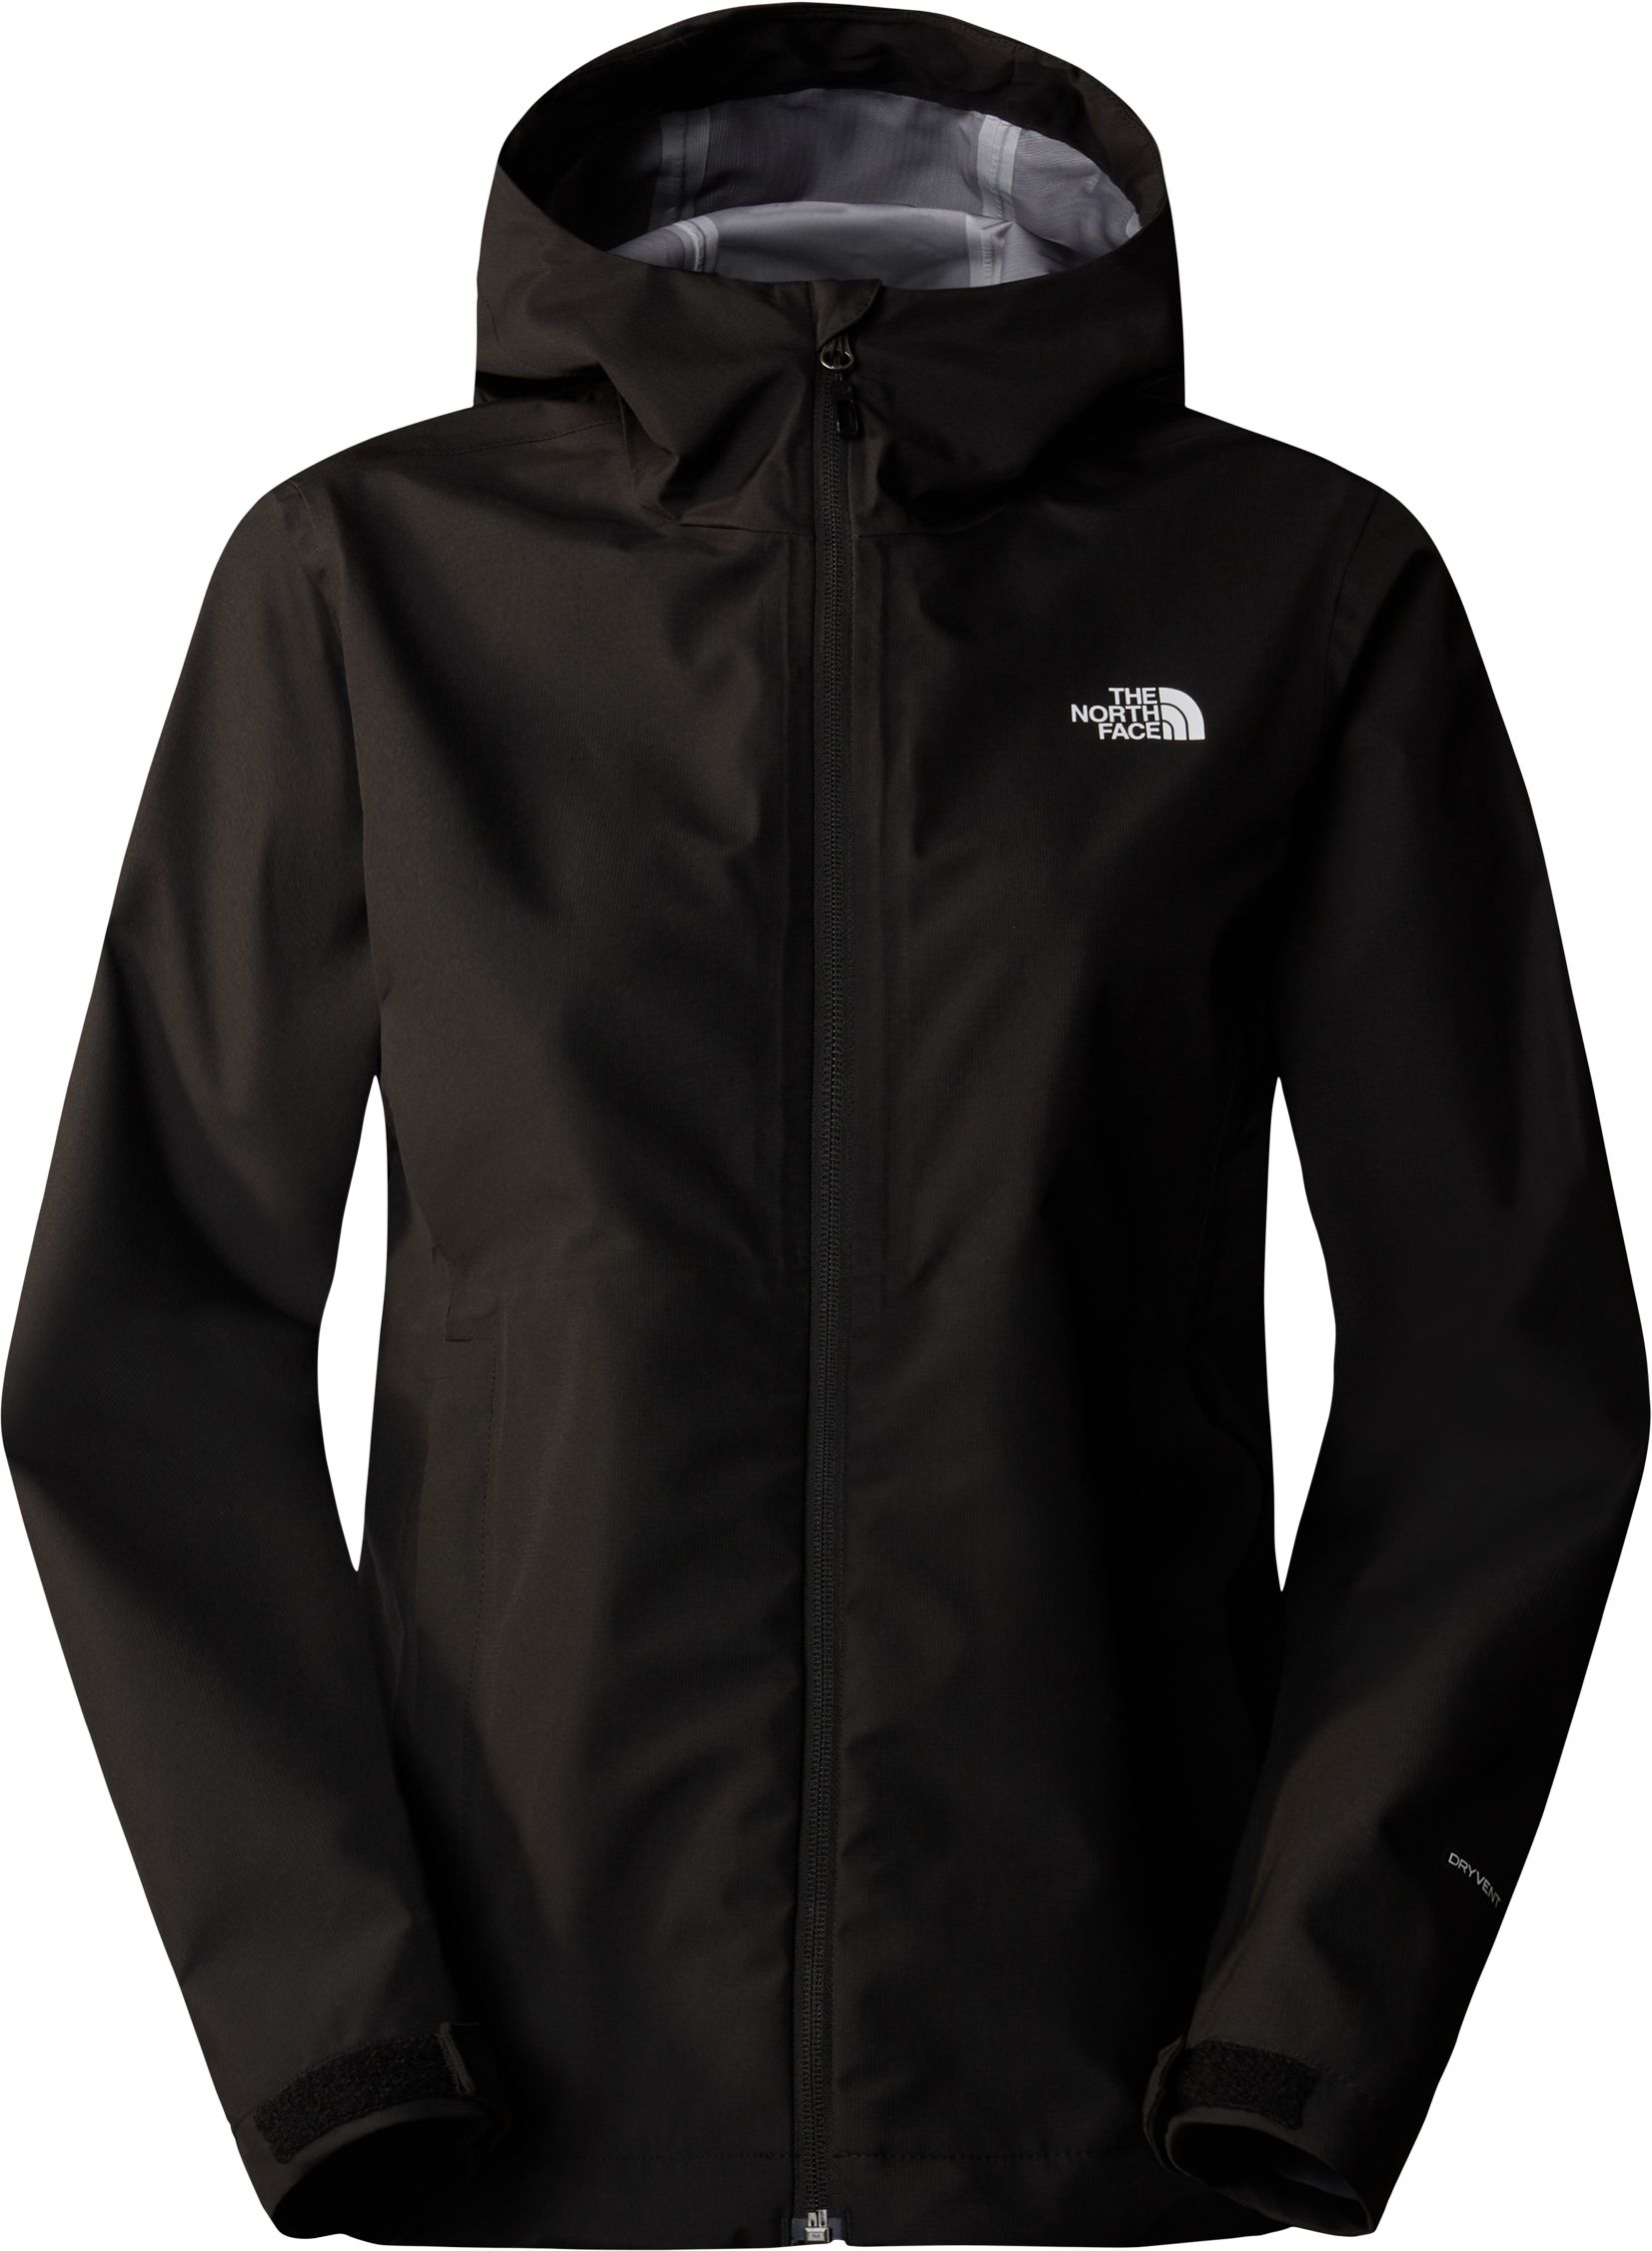 THE NORTH FACE, W WHITON 3L JACKET